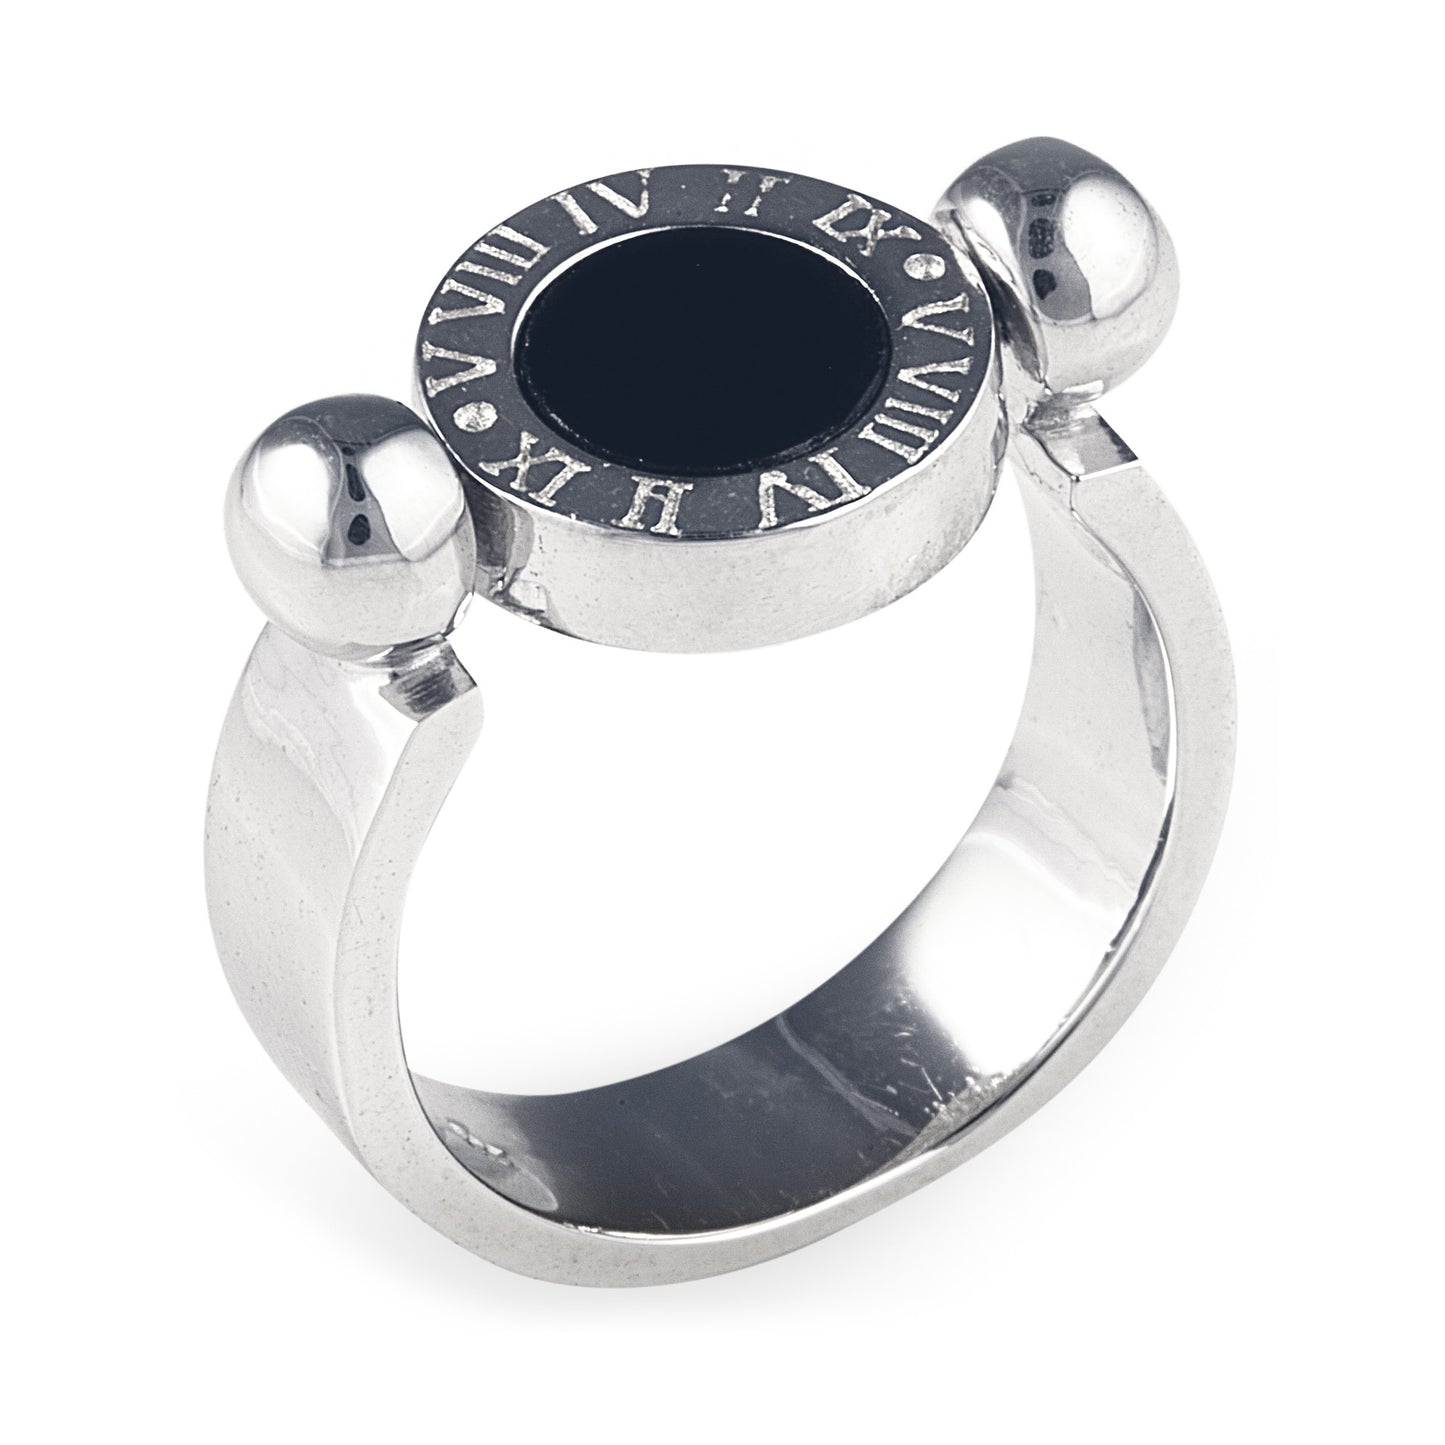 Sasha Fierce Ring in 925 Sterling Silver with double sided feature, black onyx and cubic zirconia surrounded by Roman numerals. Worldwide Shipping. Shop rings and luxury jewellery at affordable prices by Bellagio & Co. Designed in Australia. 